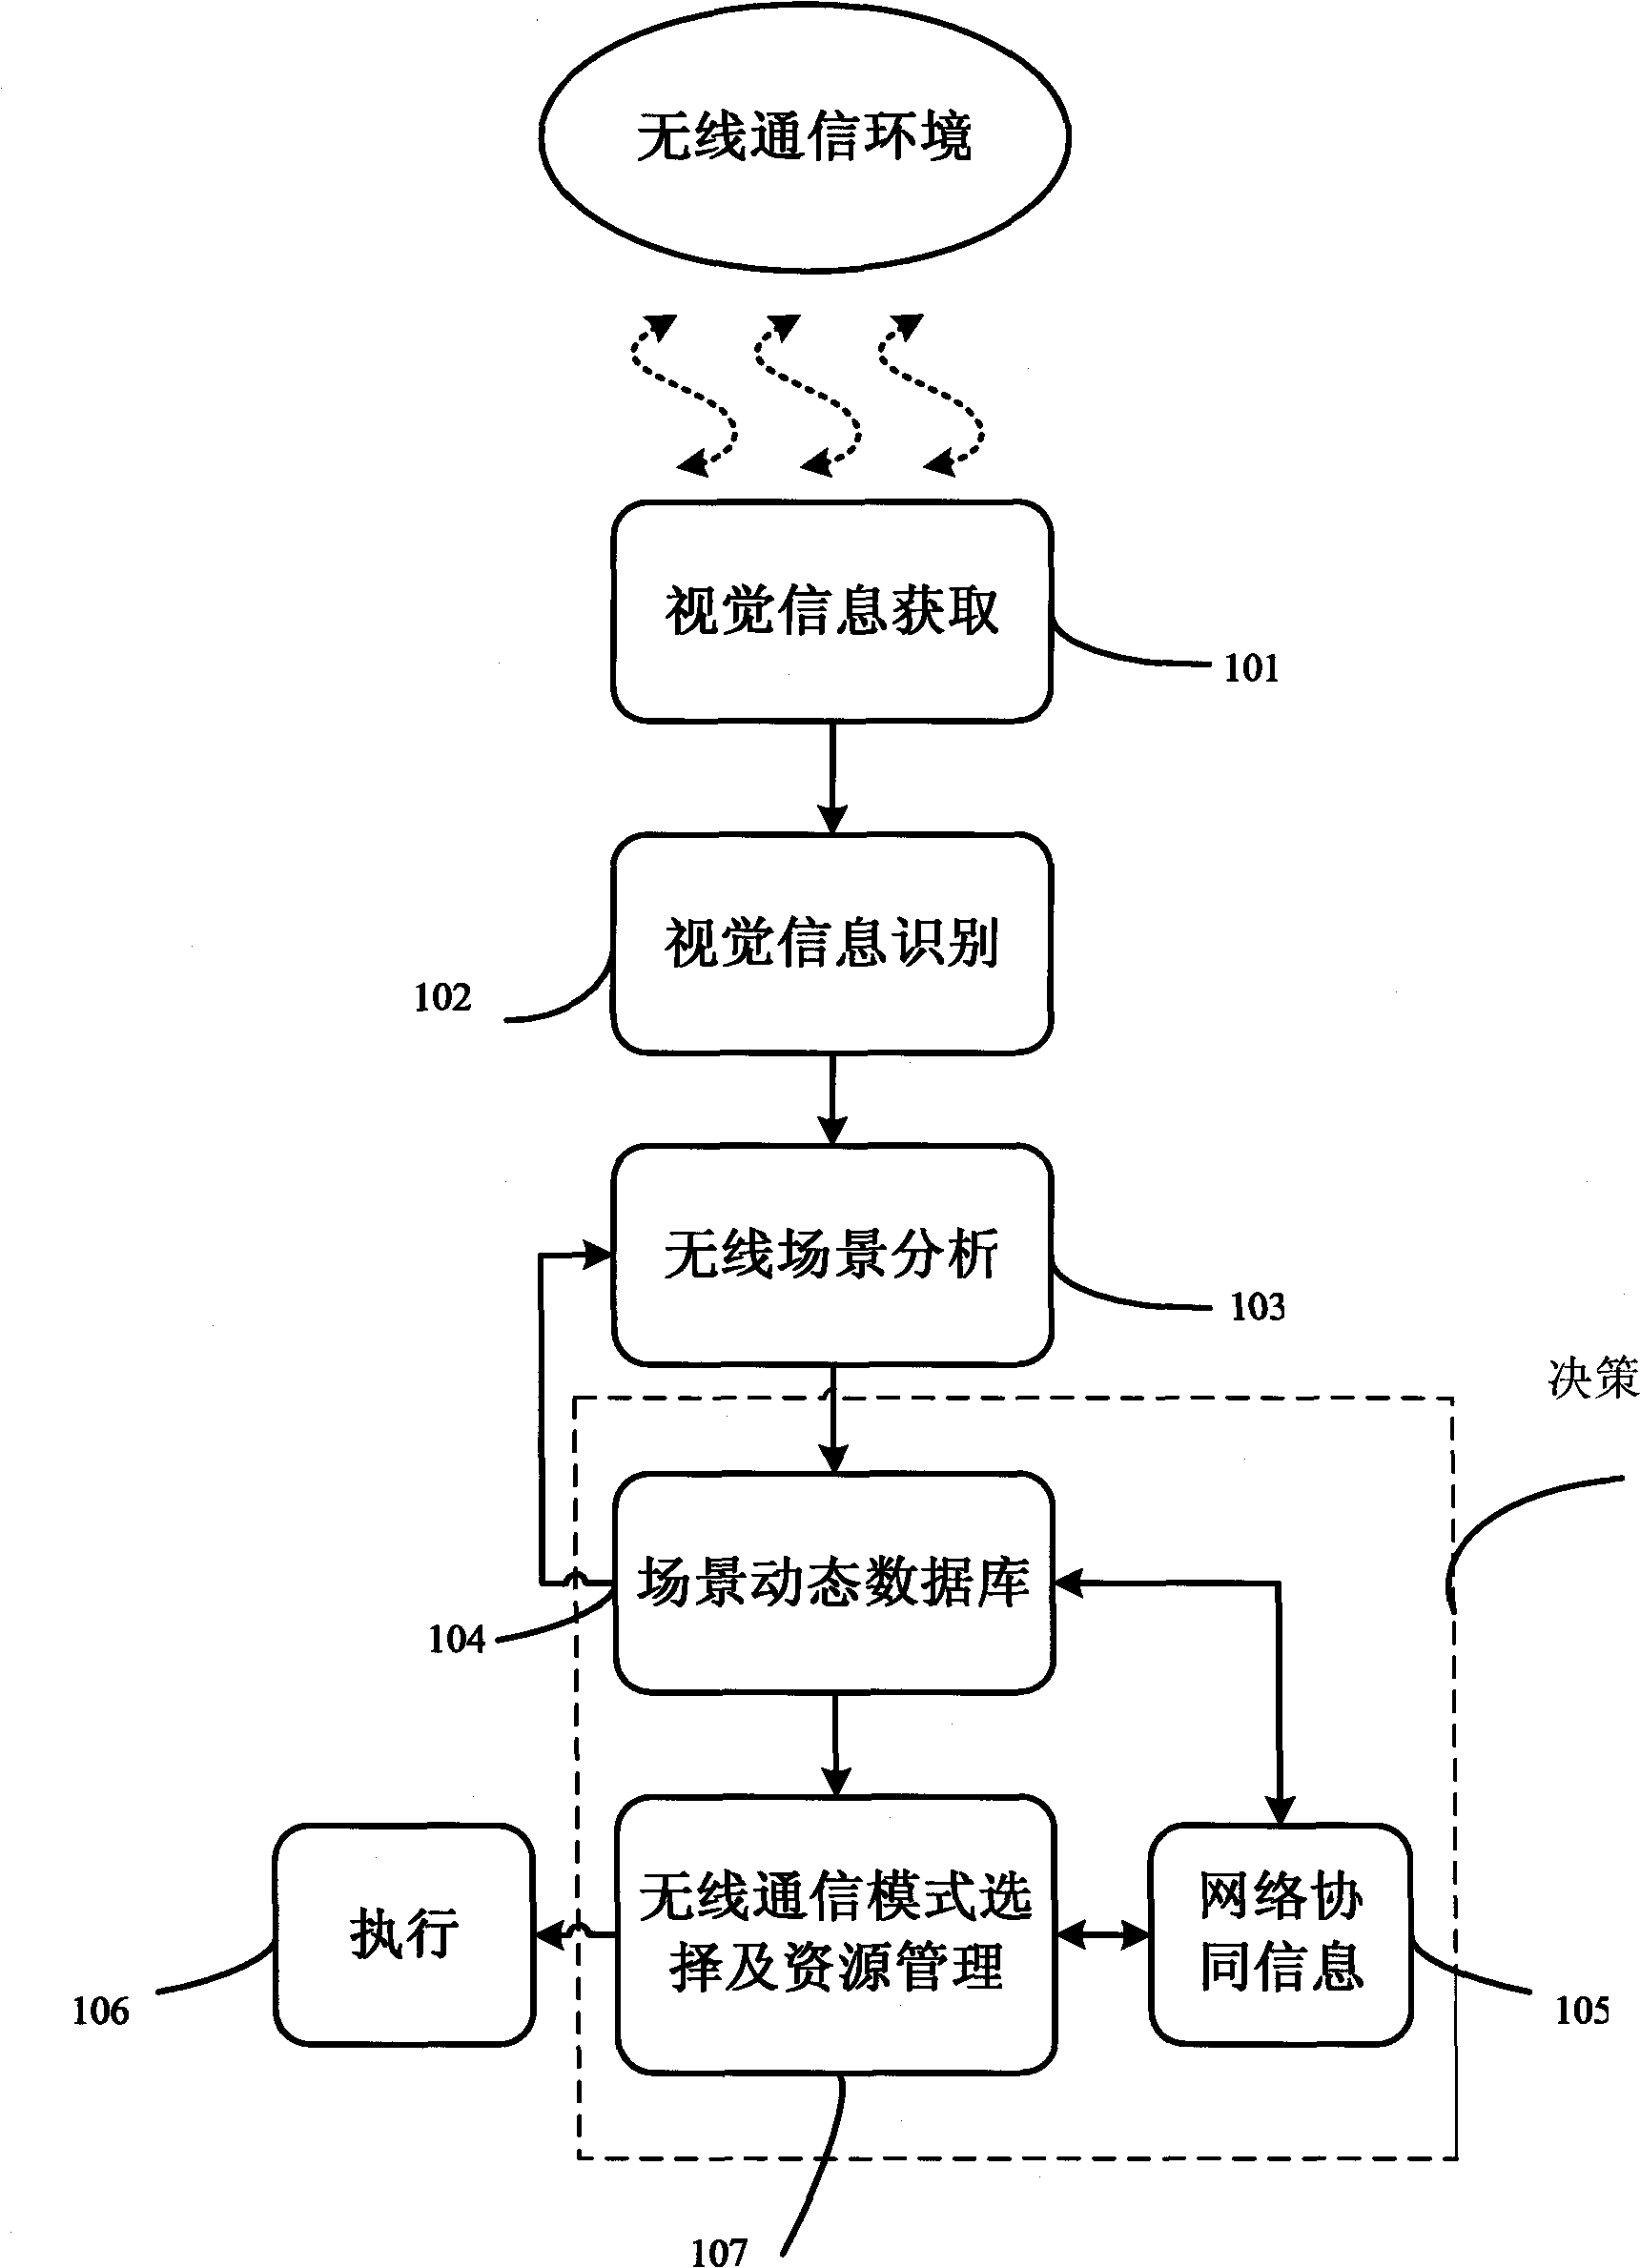 Method and system based on visual cognition in radio communication